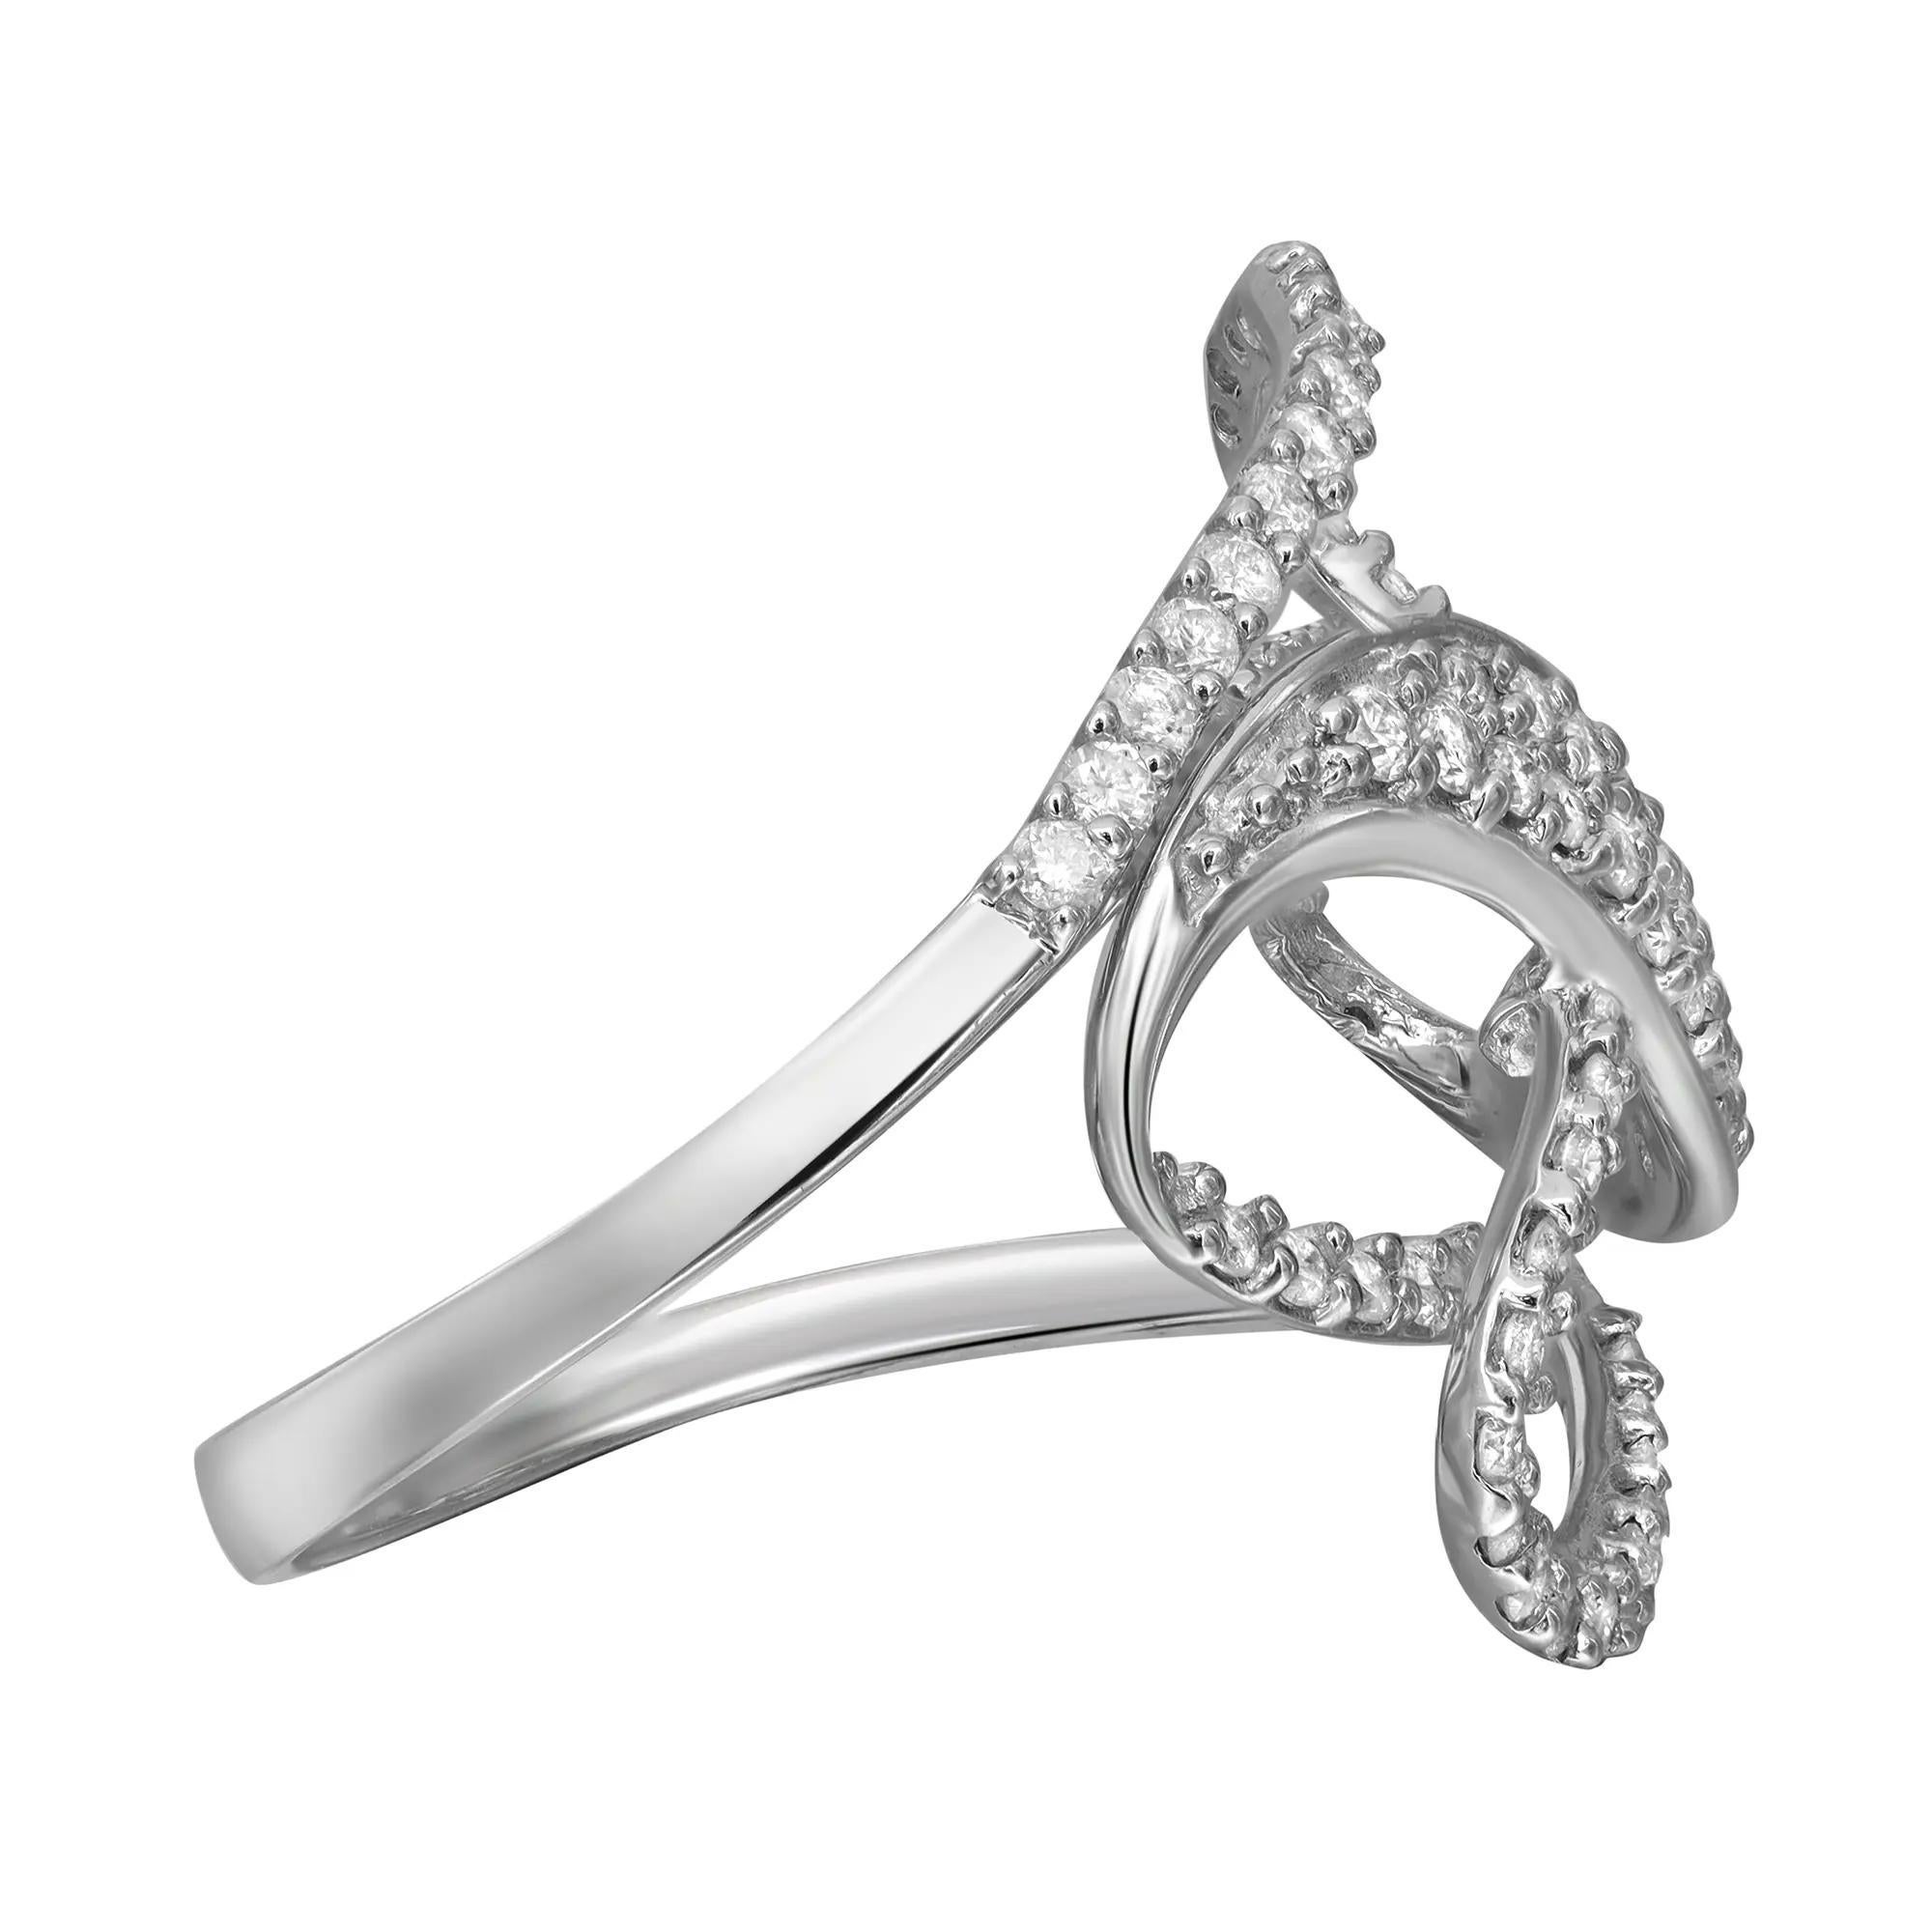 Dazzle away with this beautiful ladies cocktail ring. Crafted in 14k white gold. Showcasing prong set round brilliant cut diamonds weighing 0.85 carat. Diamond quality: I color and I clarity. Ring size: 6. Total weight: 3.85 grams. This ring is an